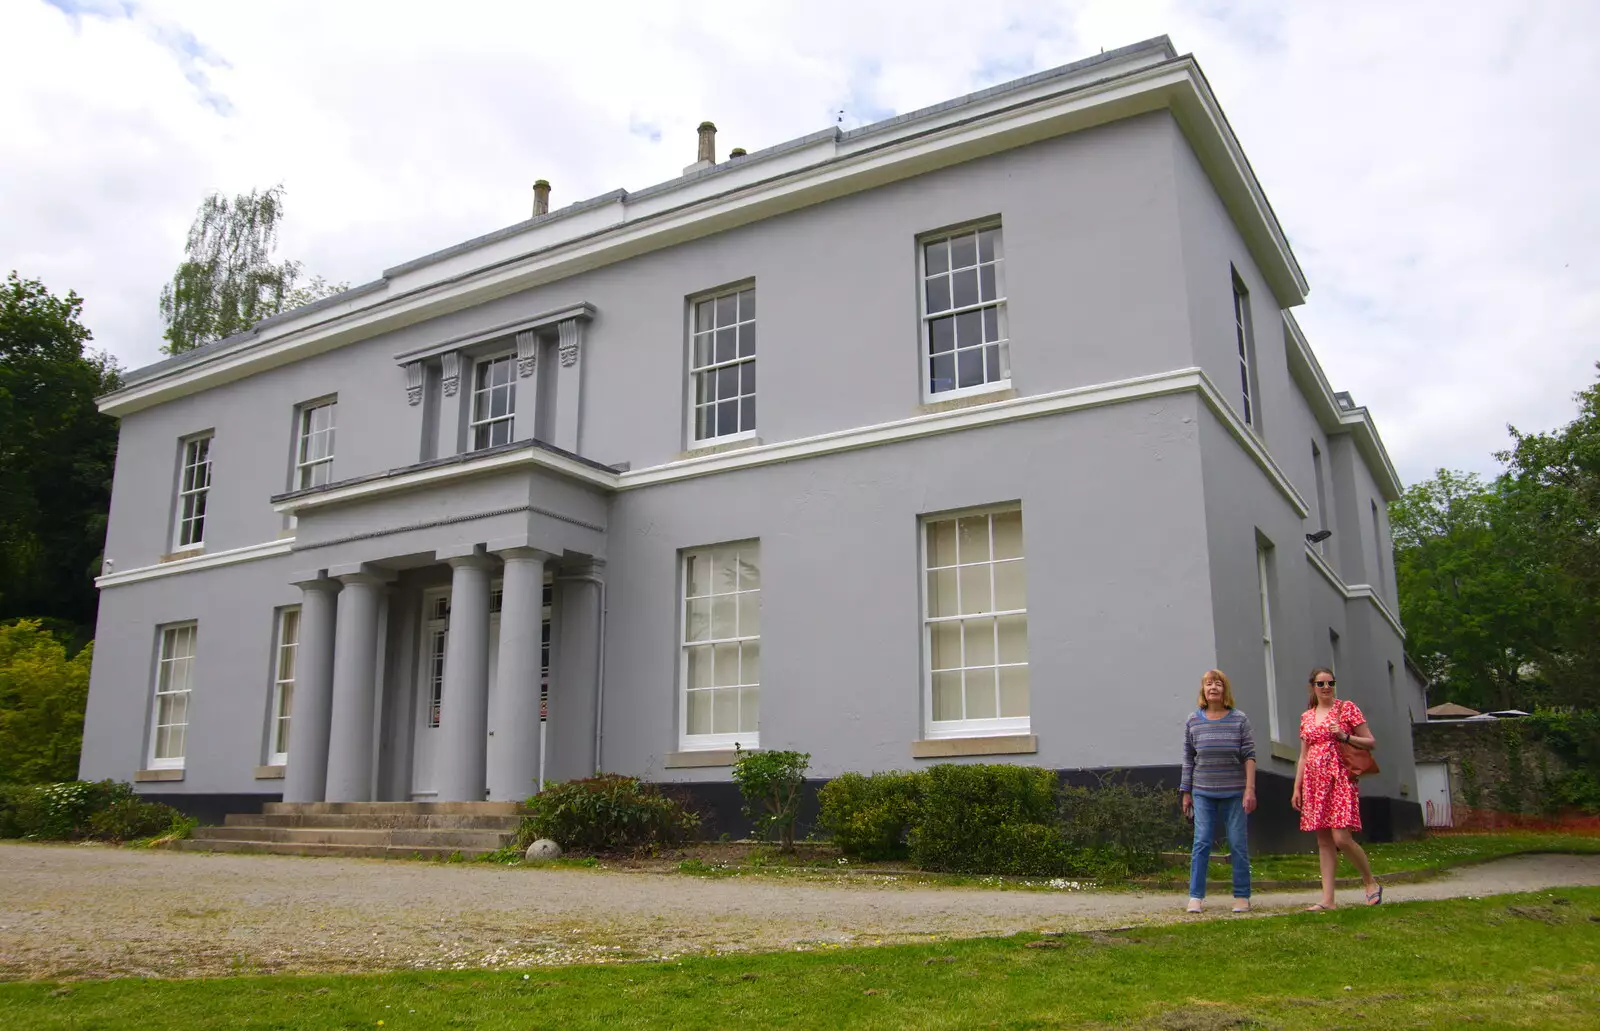 Parke House, from Chagford Lido and a Trip to Parke, Bovey Tracey, Devon - 25th May 2019